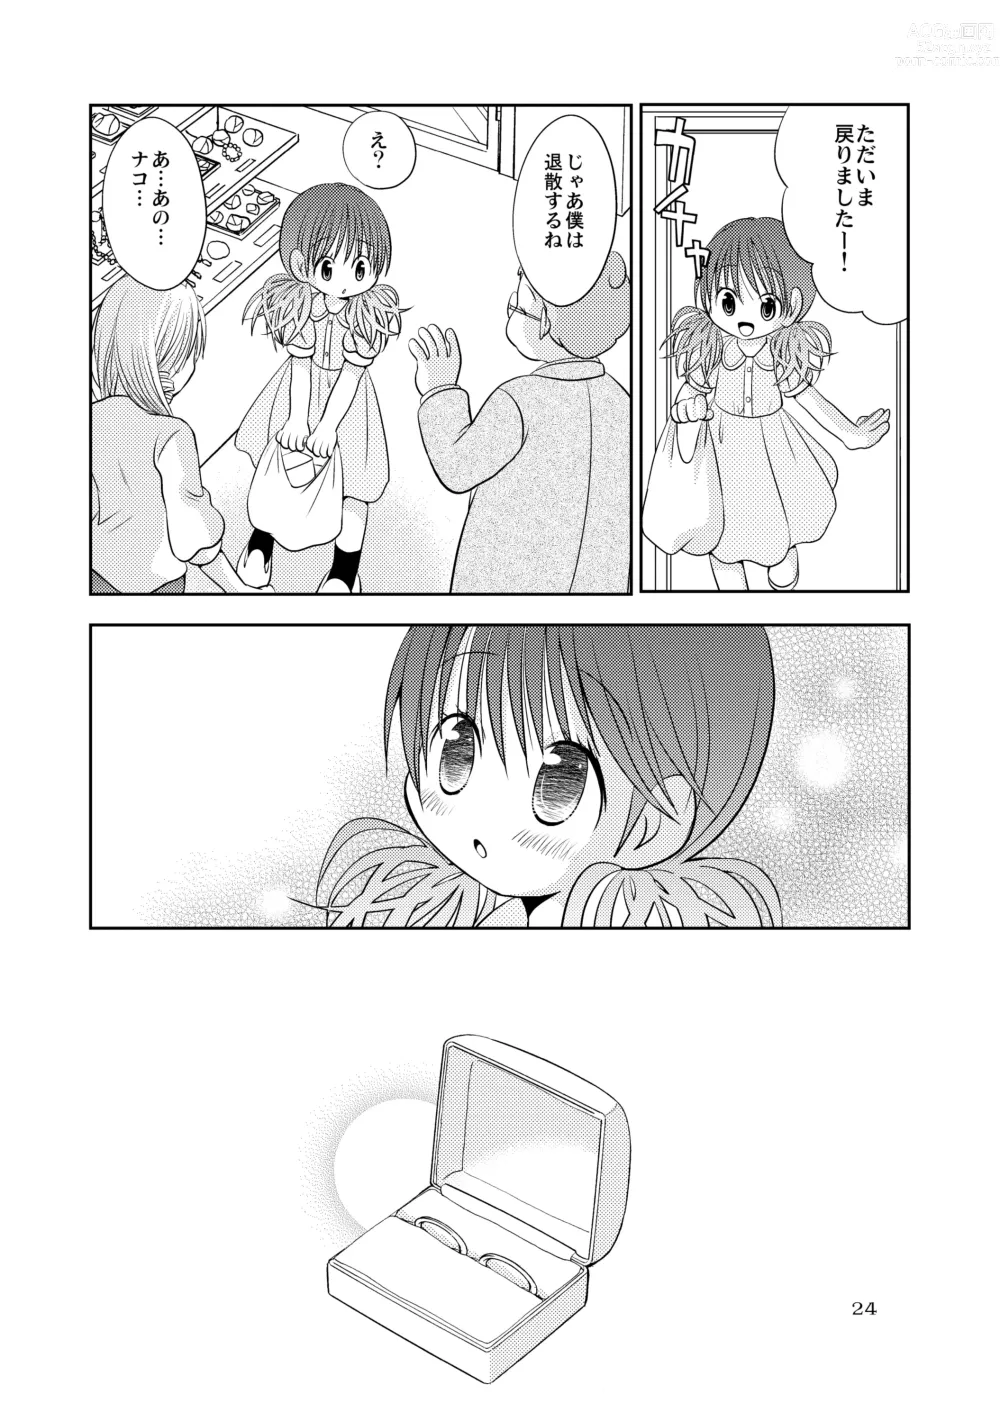 Page 23 of doujinshi Berry Berry Berry A